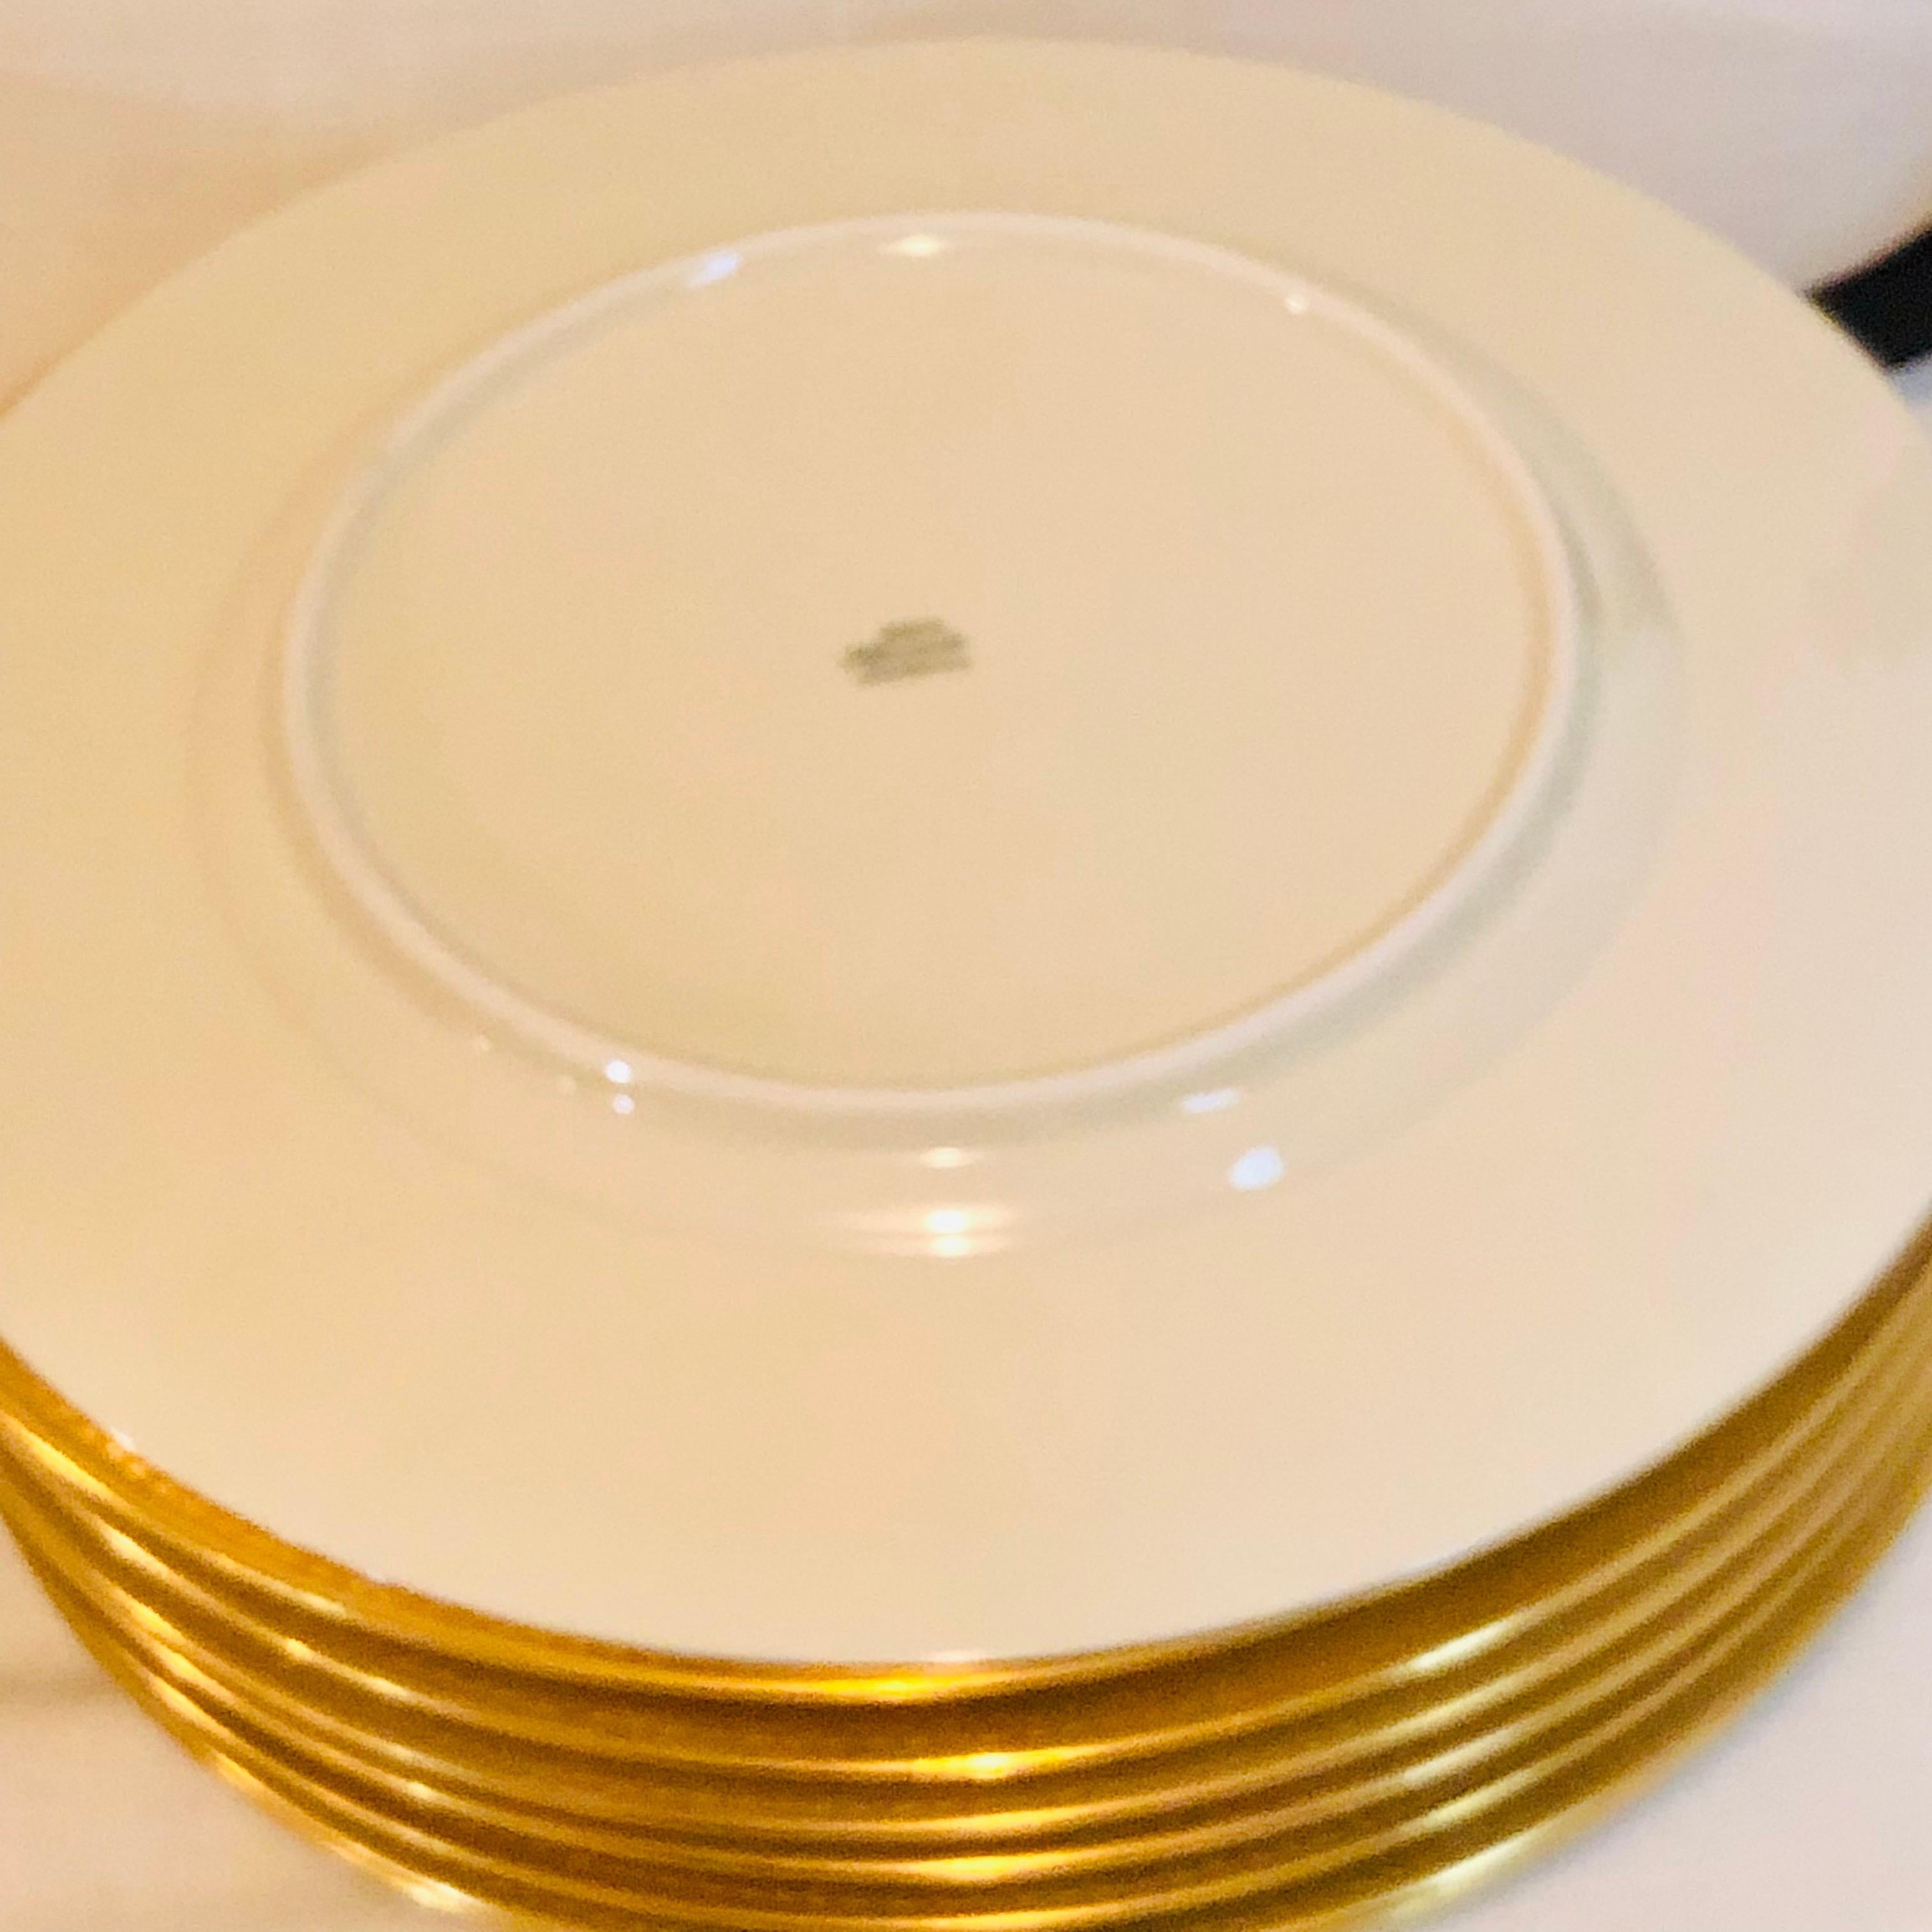 Set of 8 Bavarian Service Plates with Thick Border of Gold Embossed Decoration 3